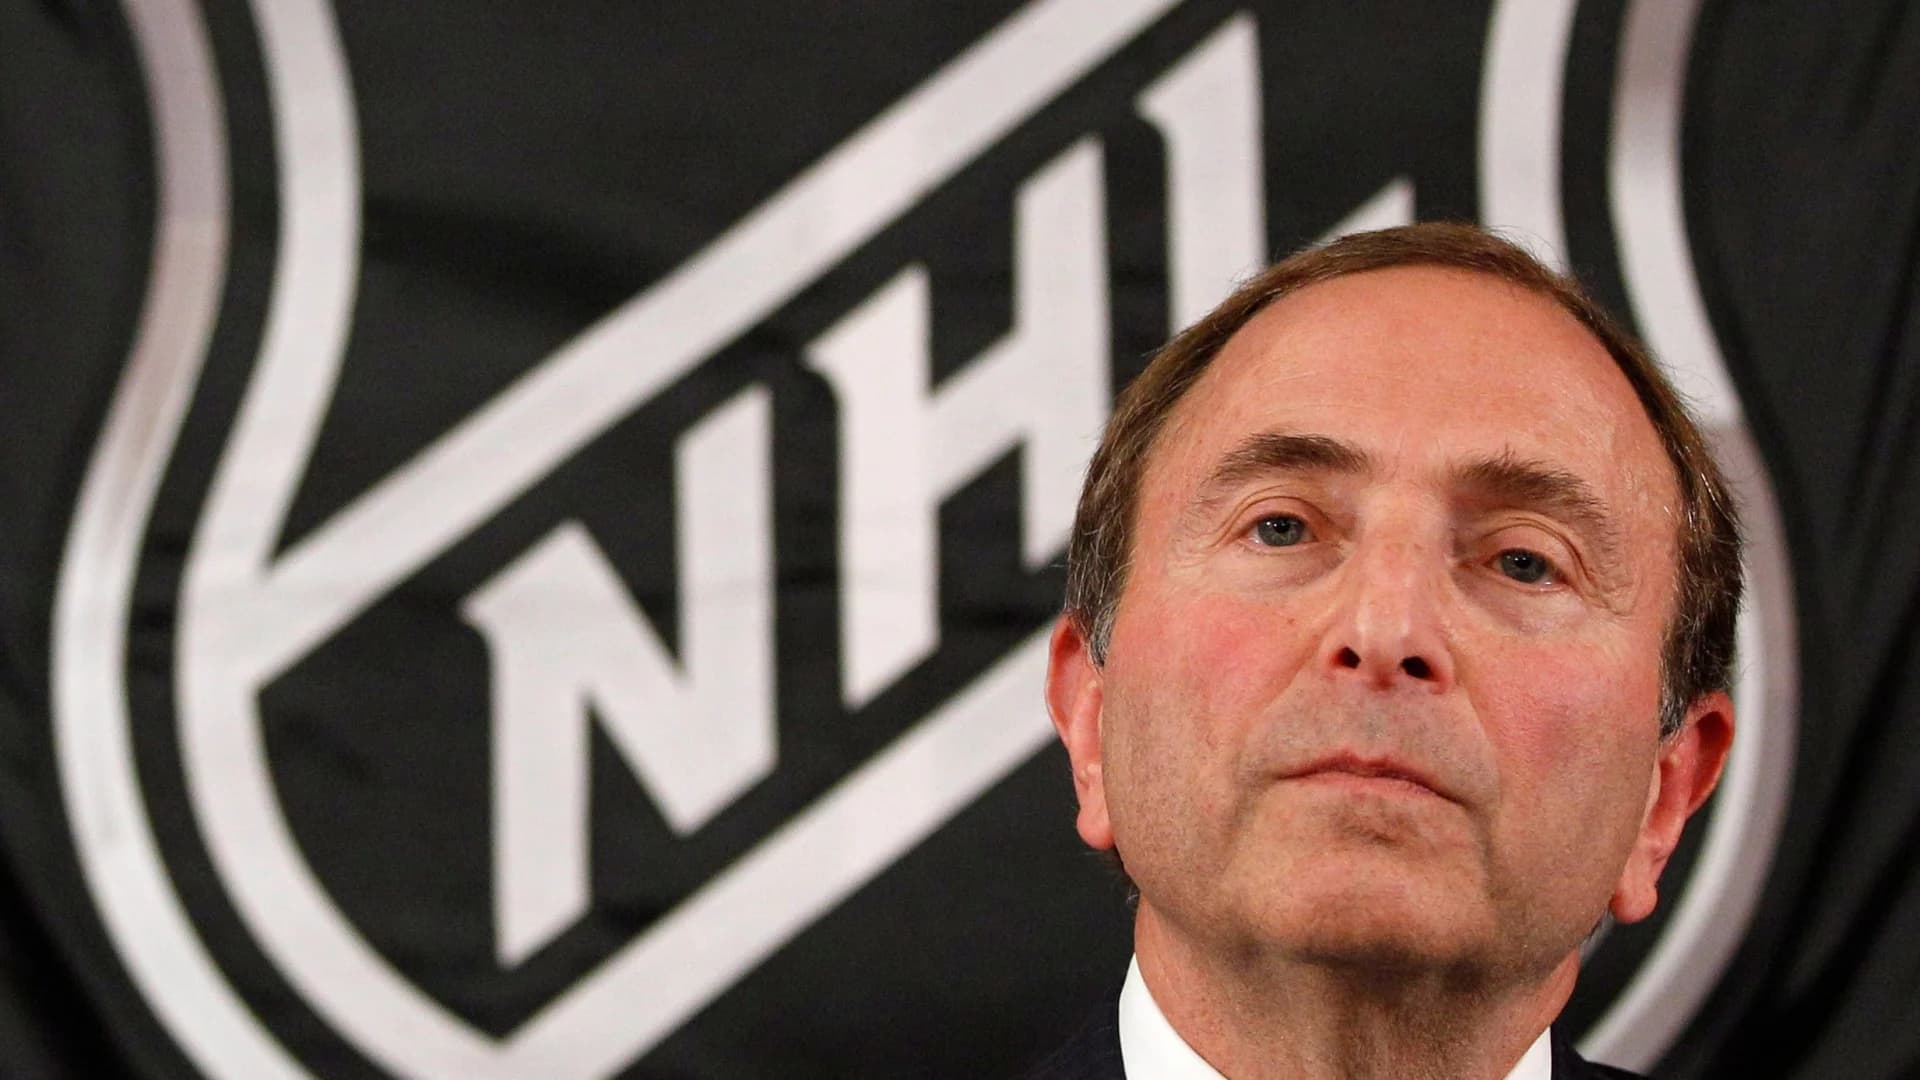 NHL players stay with CBA, labor peace set to at least 2022